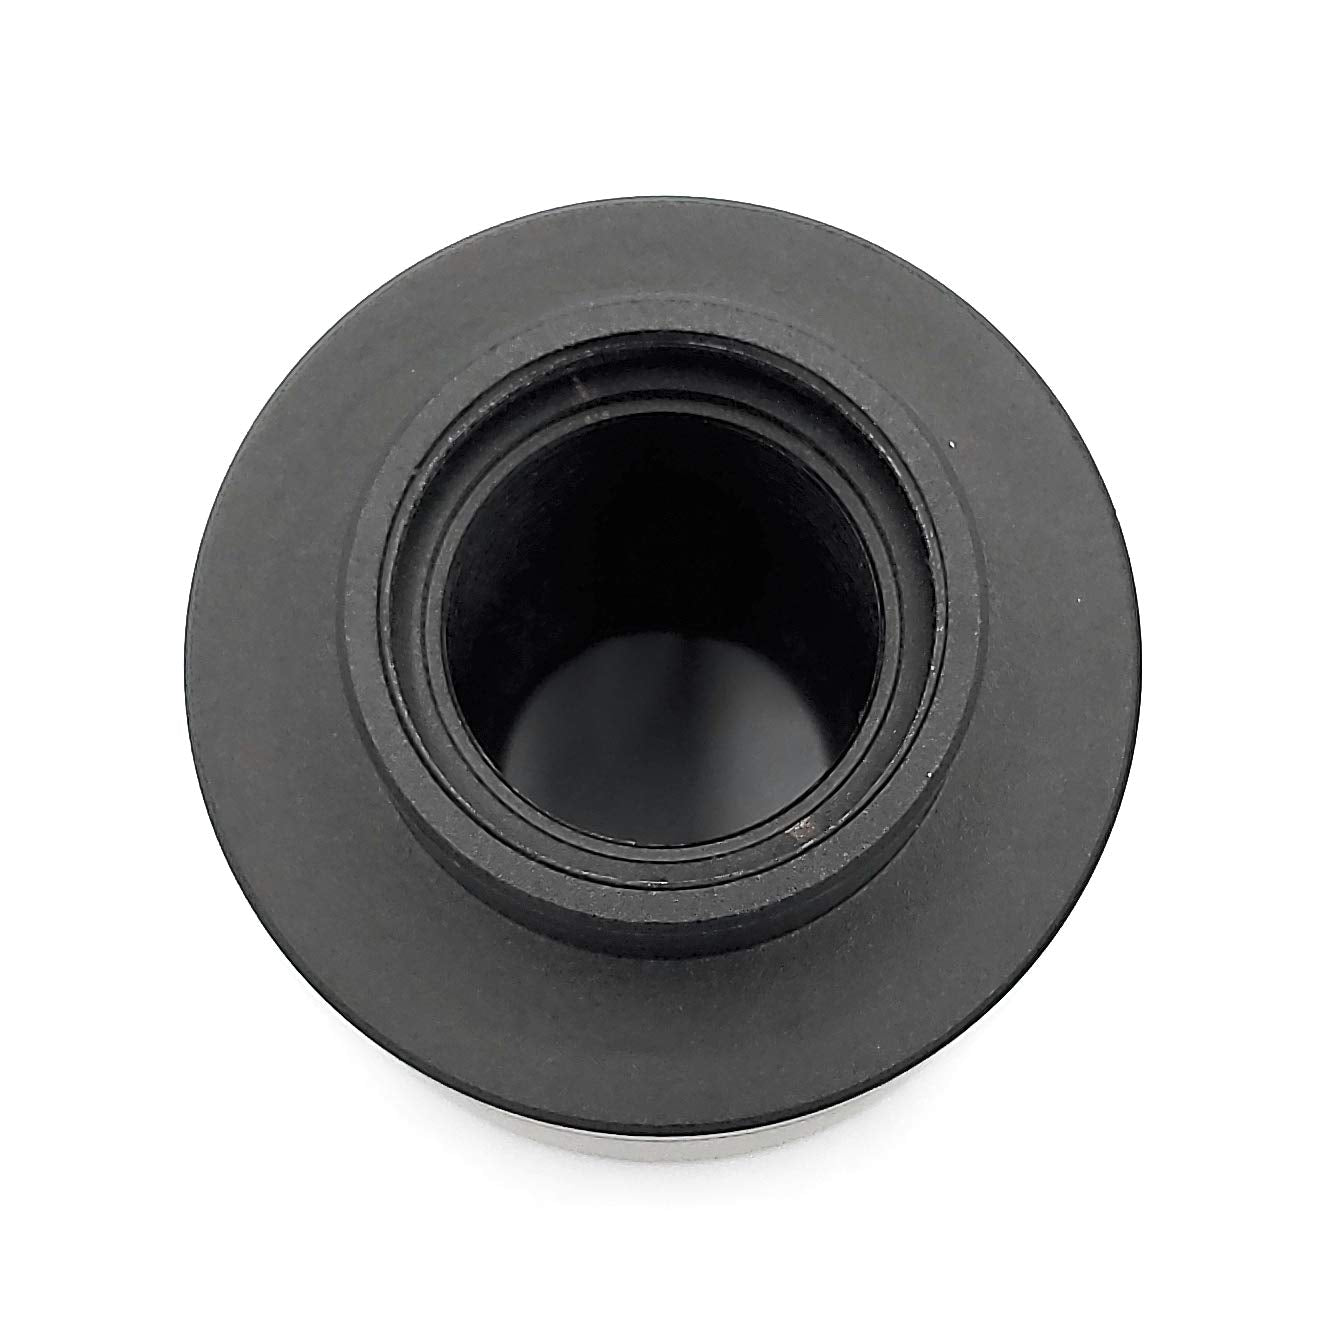 C-Mount Camera Adapter for Zeiss Microscope with ISO 30mm Port